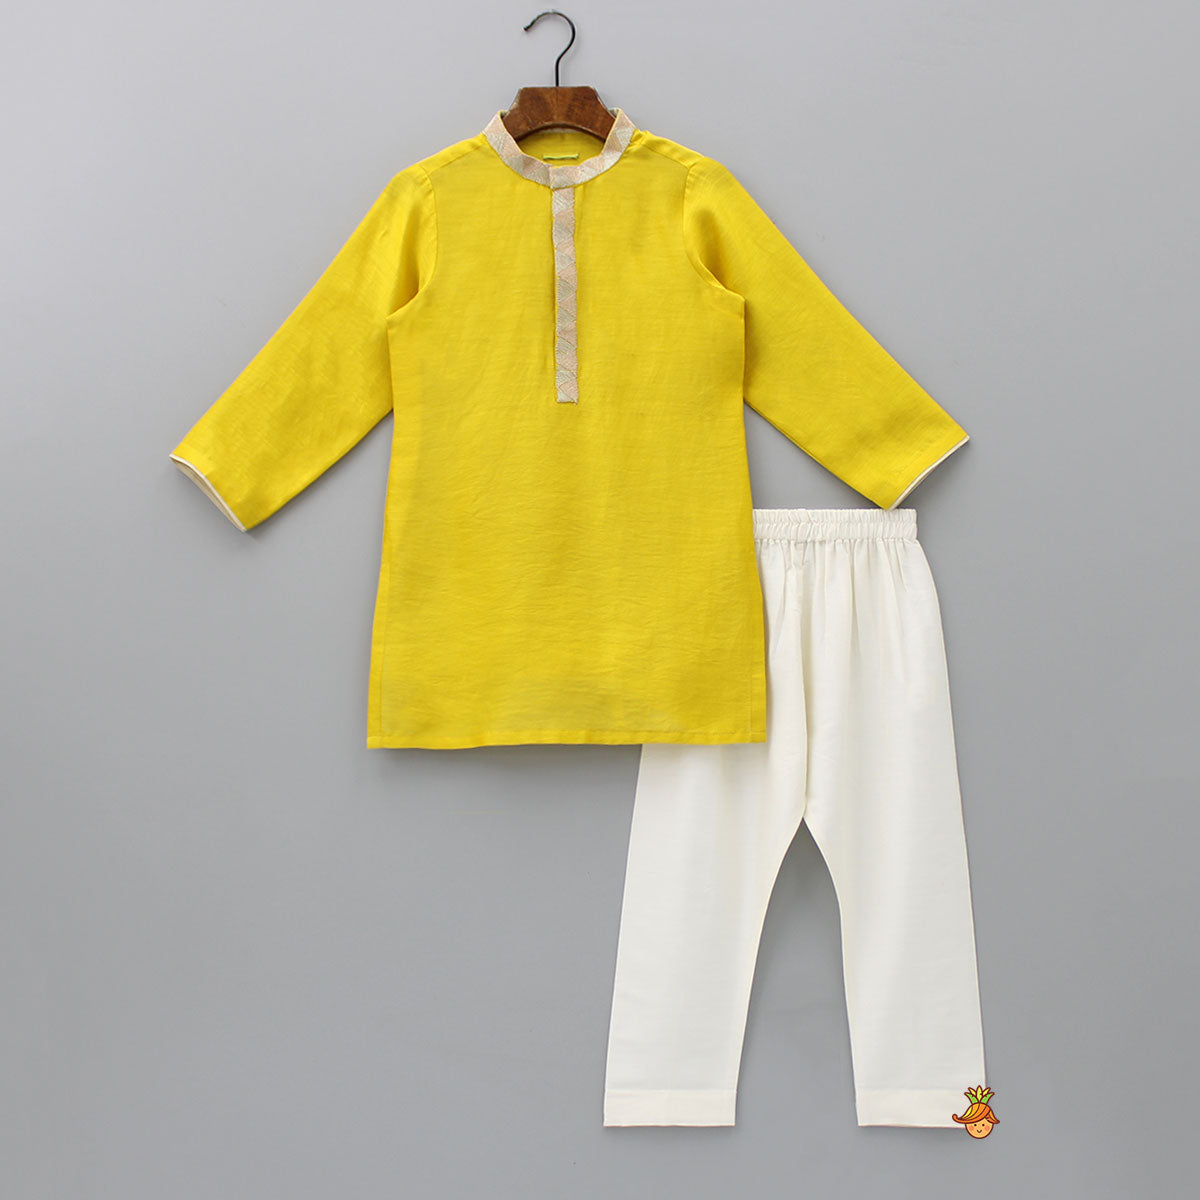 Chevron Embroidered Collar And Front Placket Yellow Kurta With Jacket And Pyjama